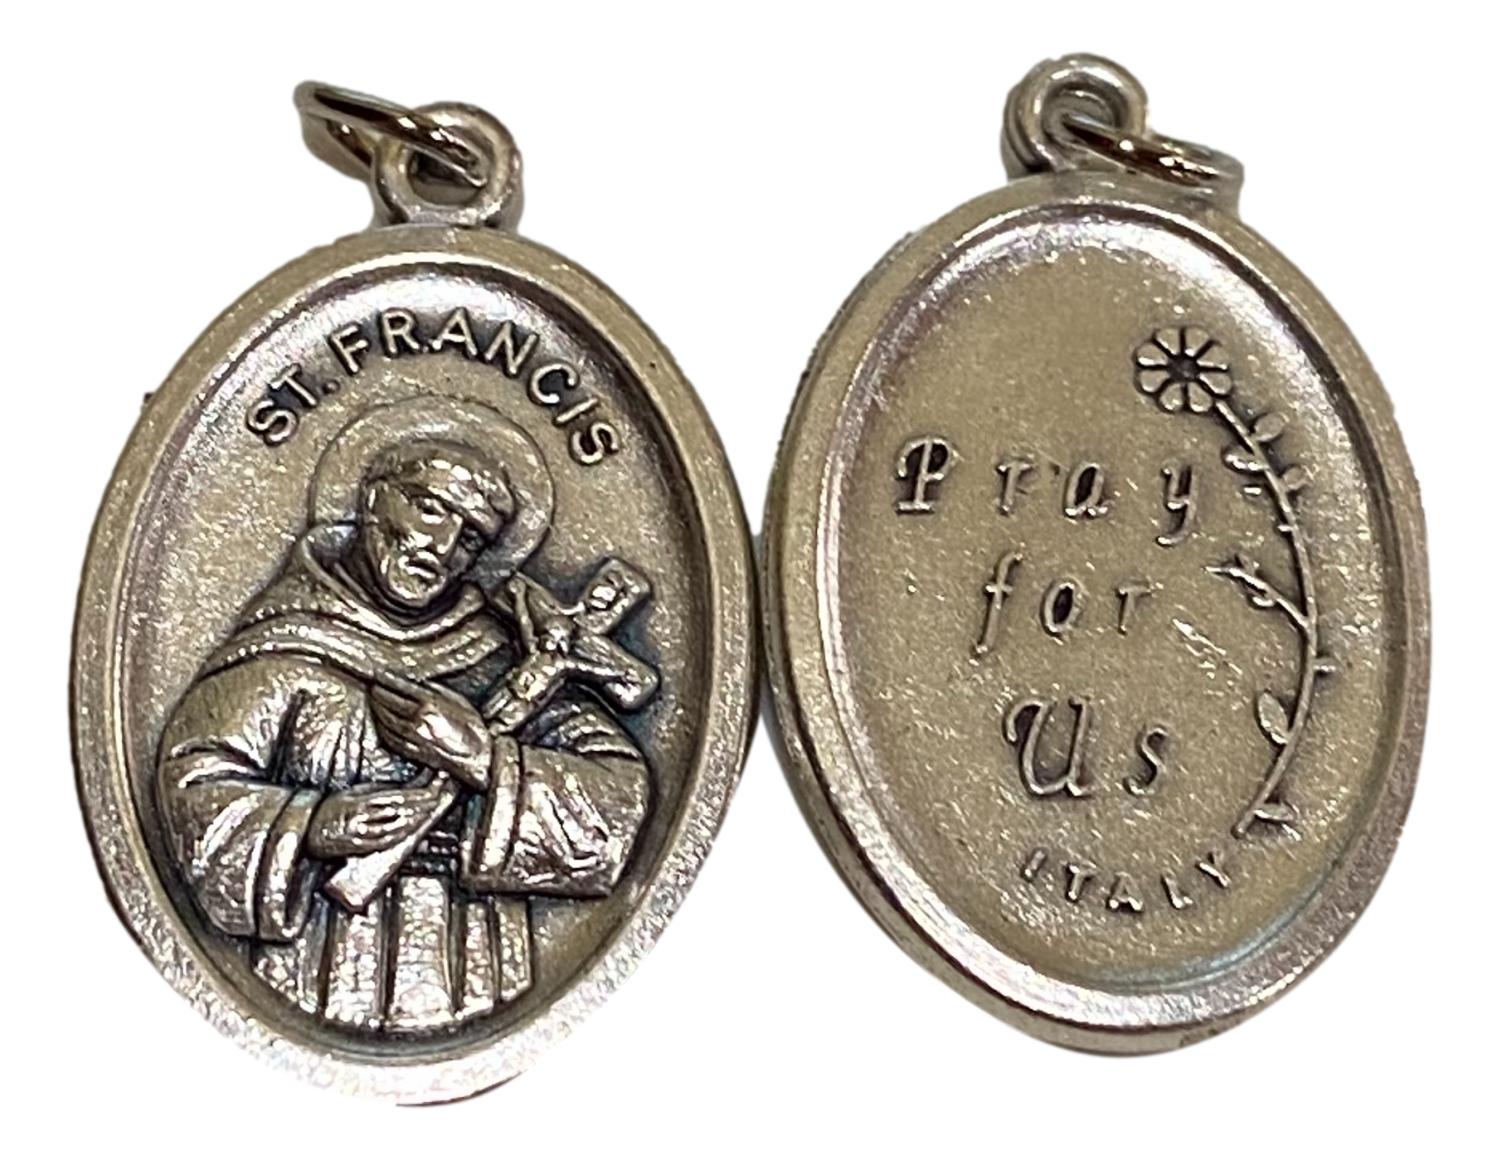 Medal Saint Francis Pray For Us Italian Double-Sided Silver Oxidized Metal Alloy 1 inch - Ysleta Mission Gift Shop- VOTED El Paso's Best Gift Shop